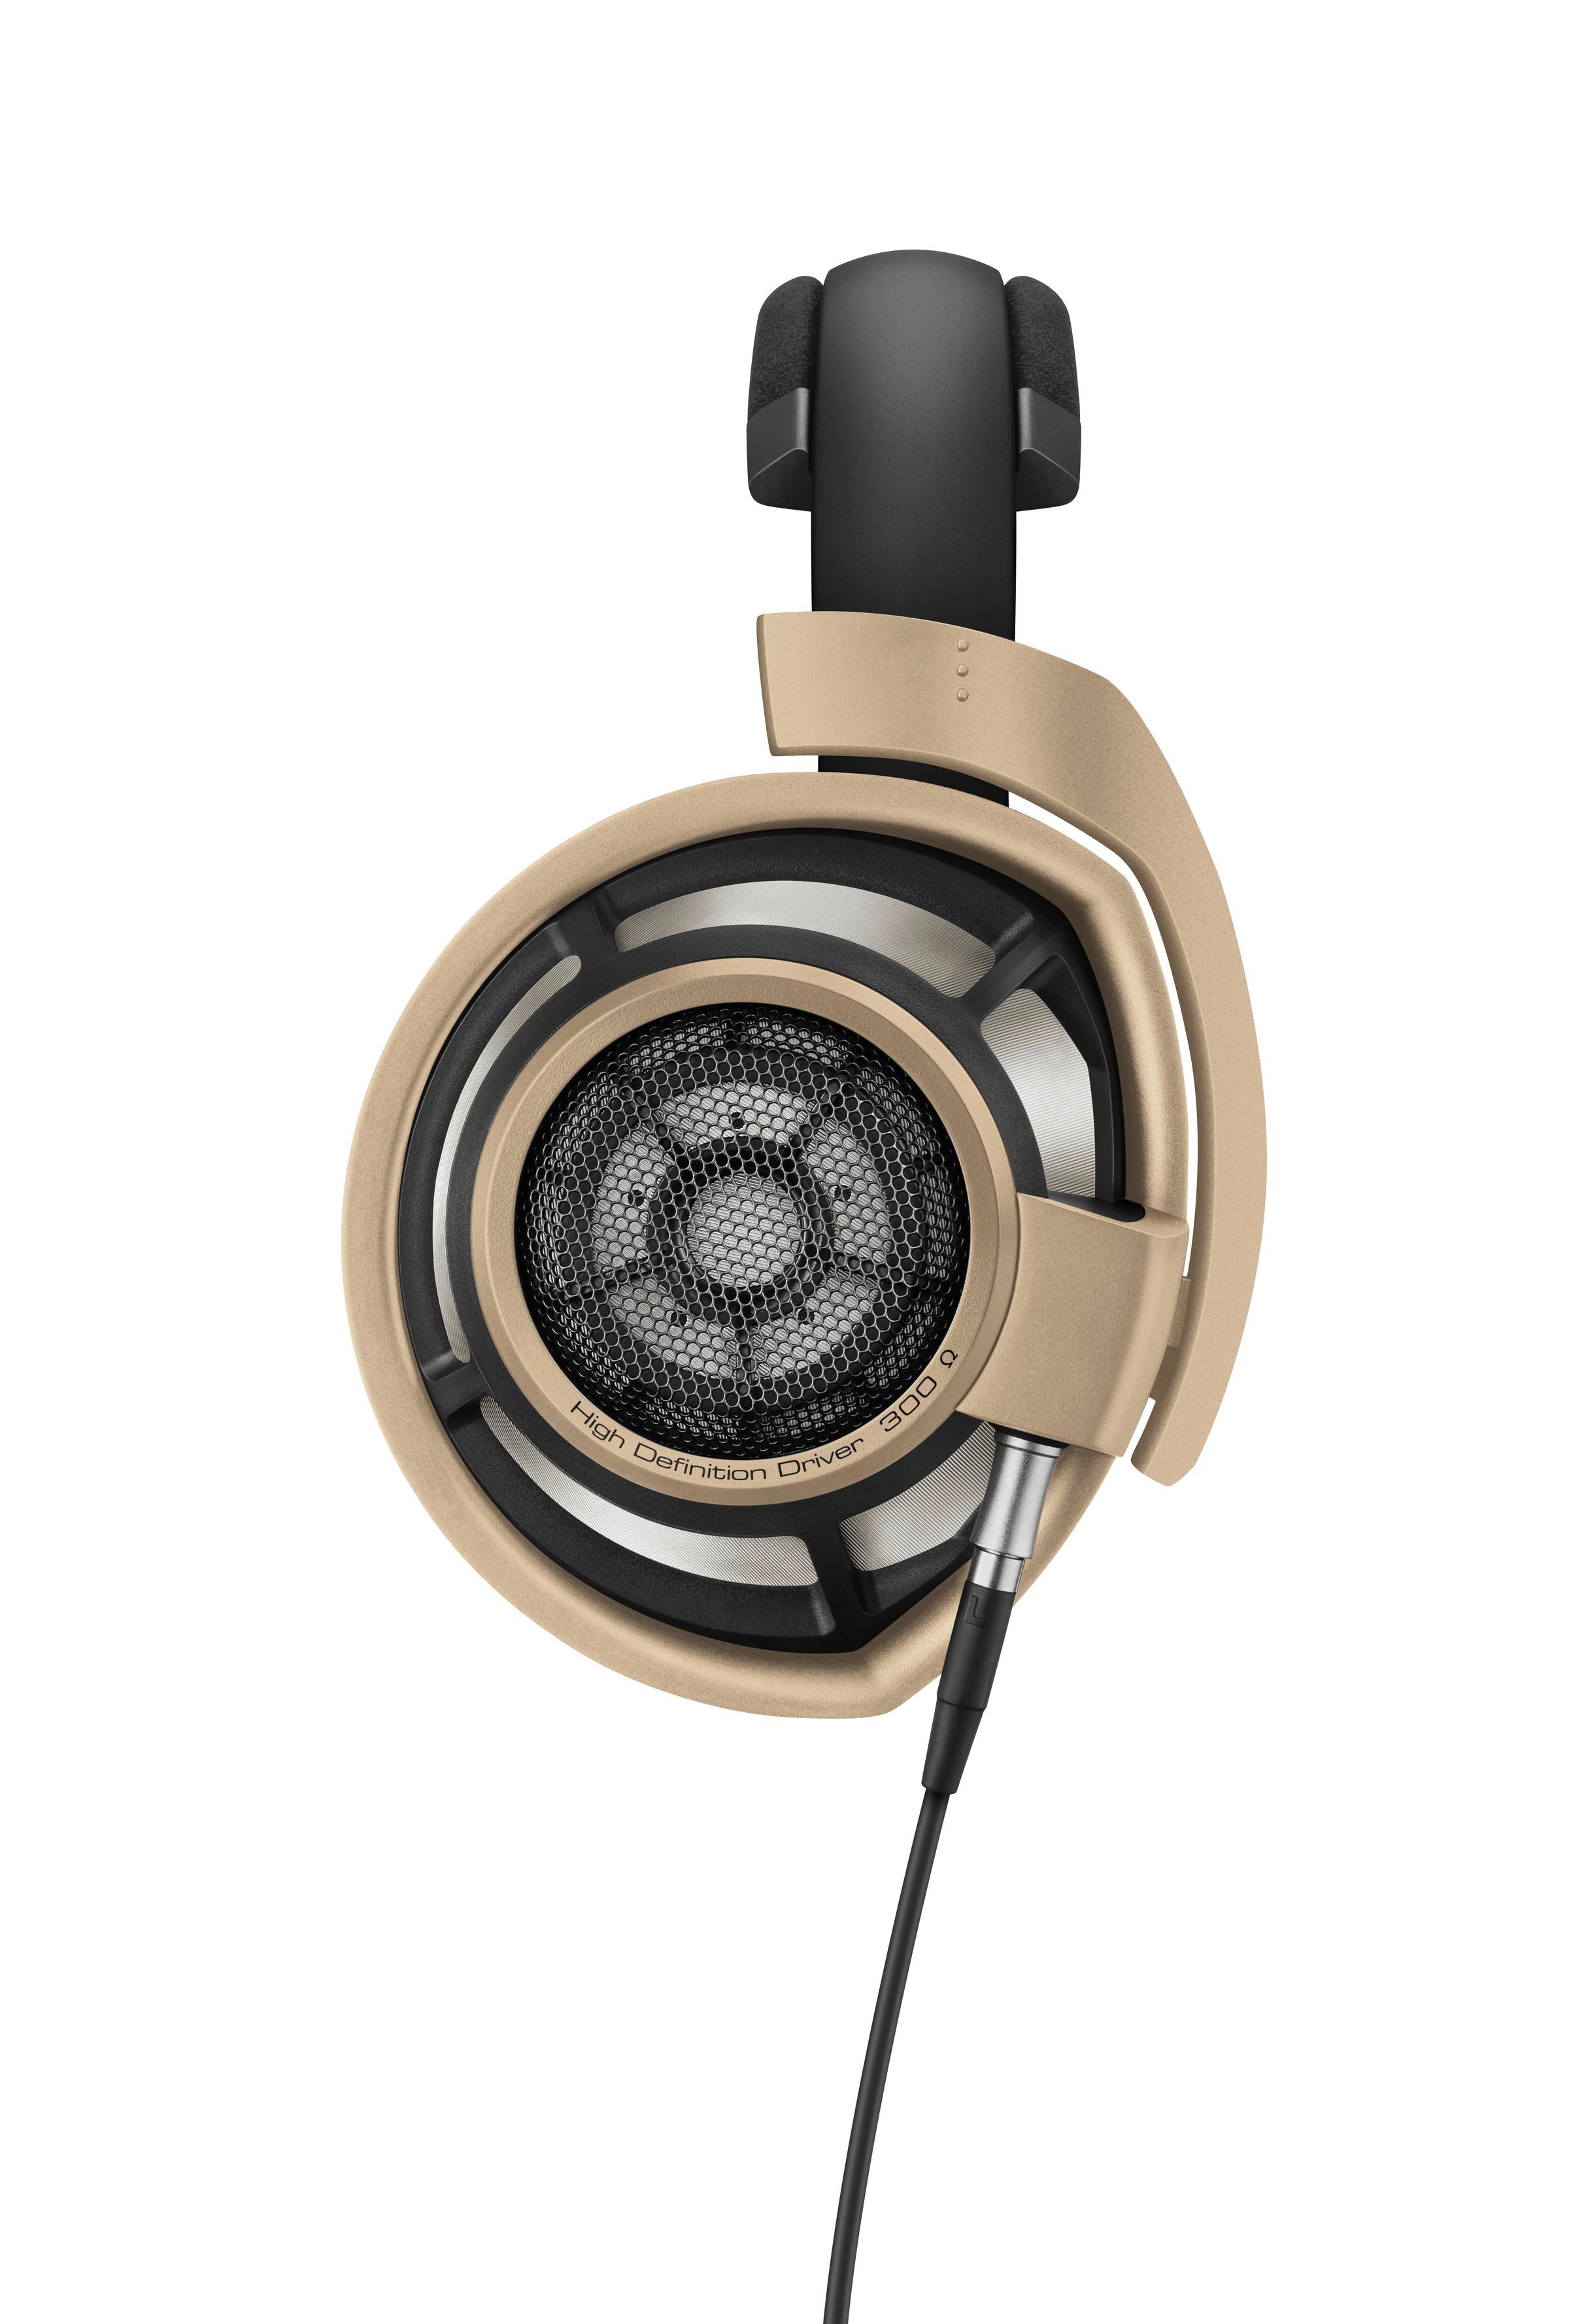 Sennheiser releases special Anniversary Edition of acclaimed HD